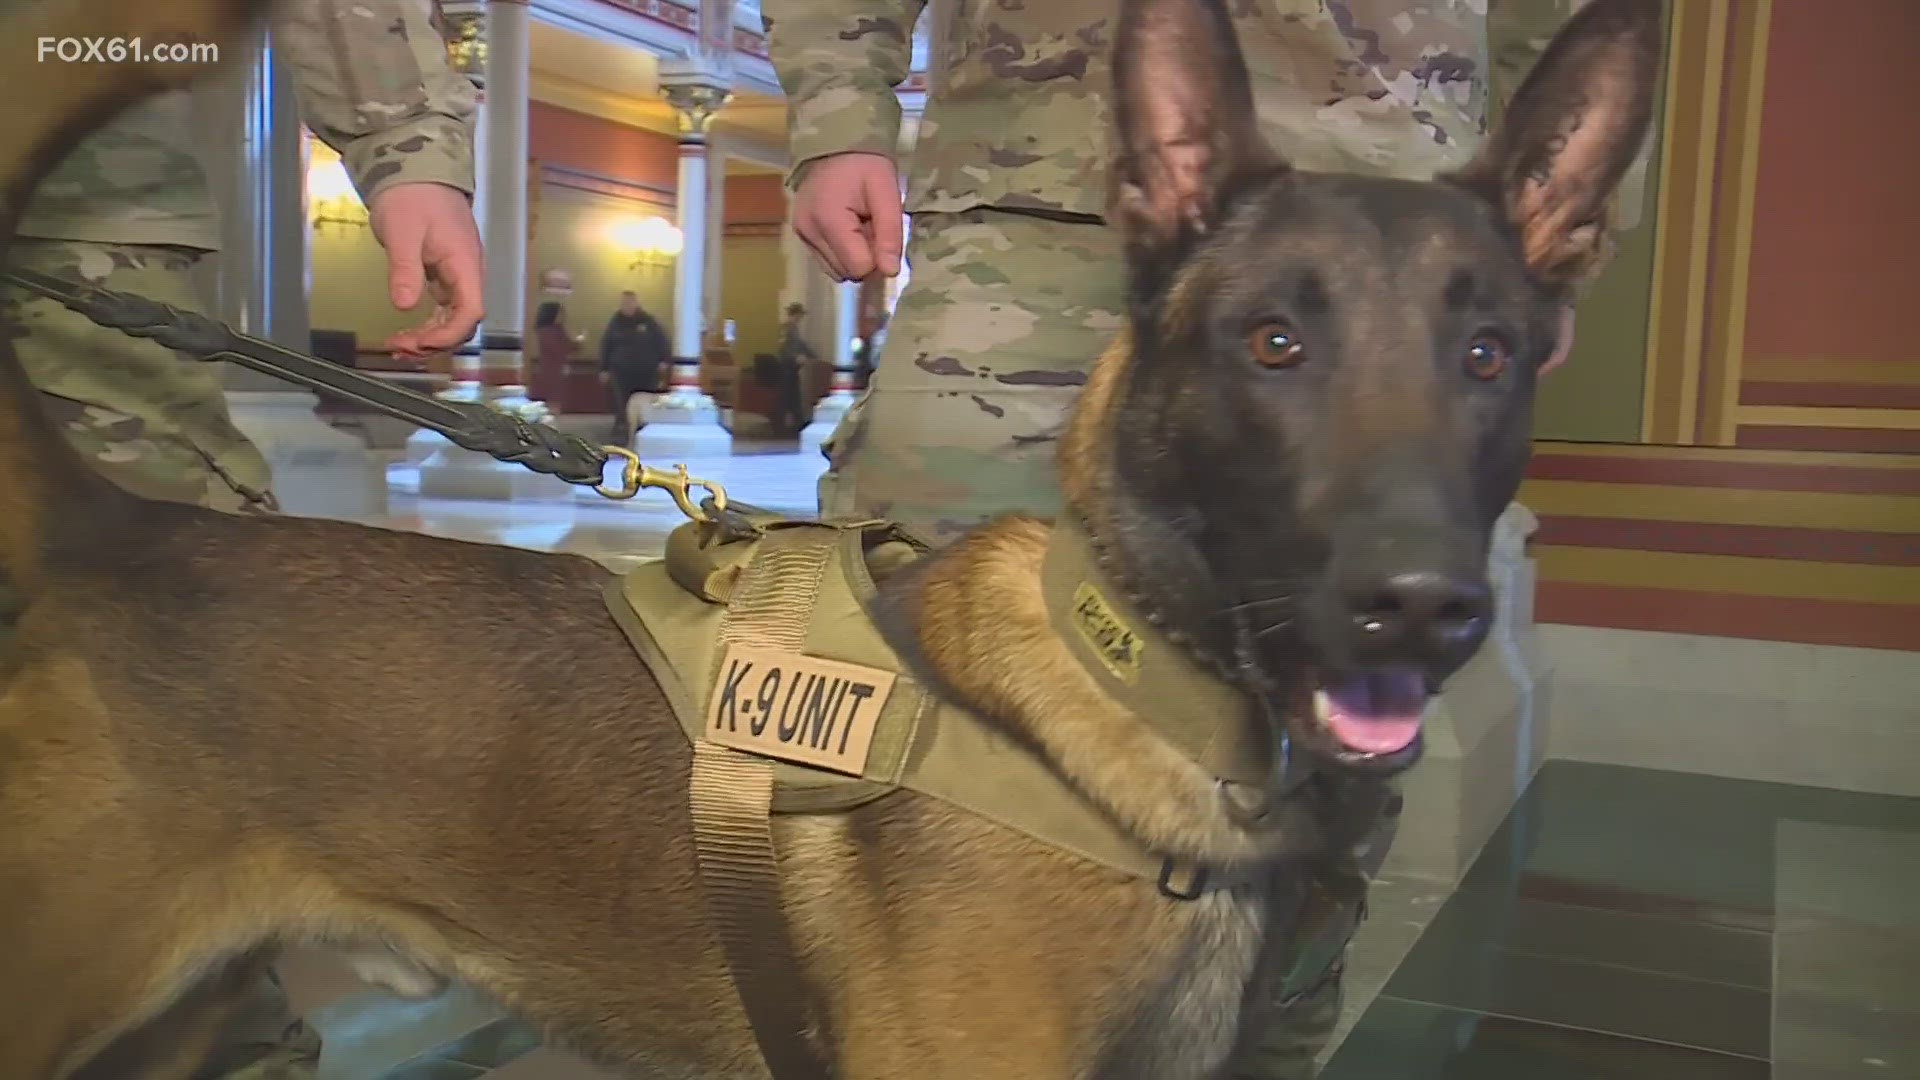 Dogs of distinction – joined by their handlers and trainers – received a warm welcome at the State Capitol on Monday for K9 Veteran’s Day.